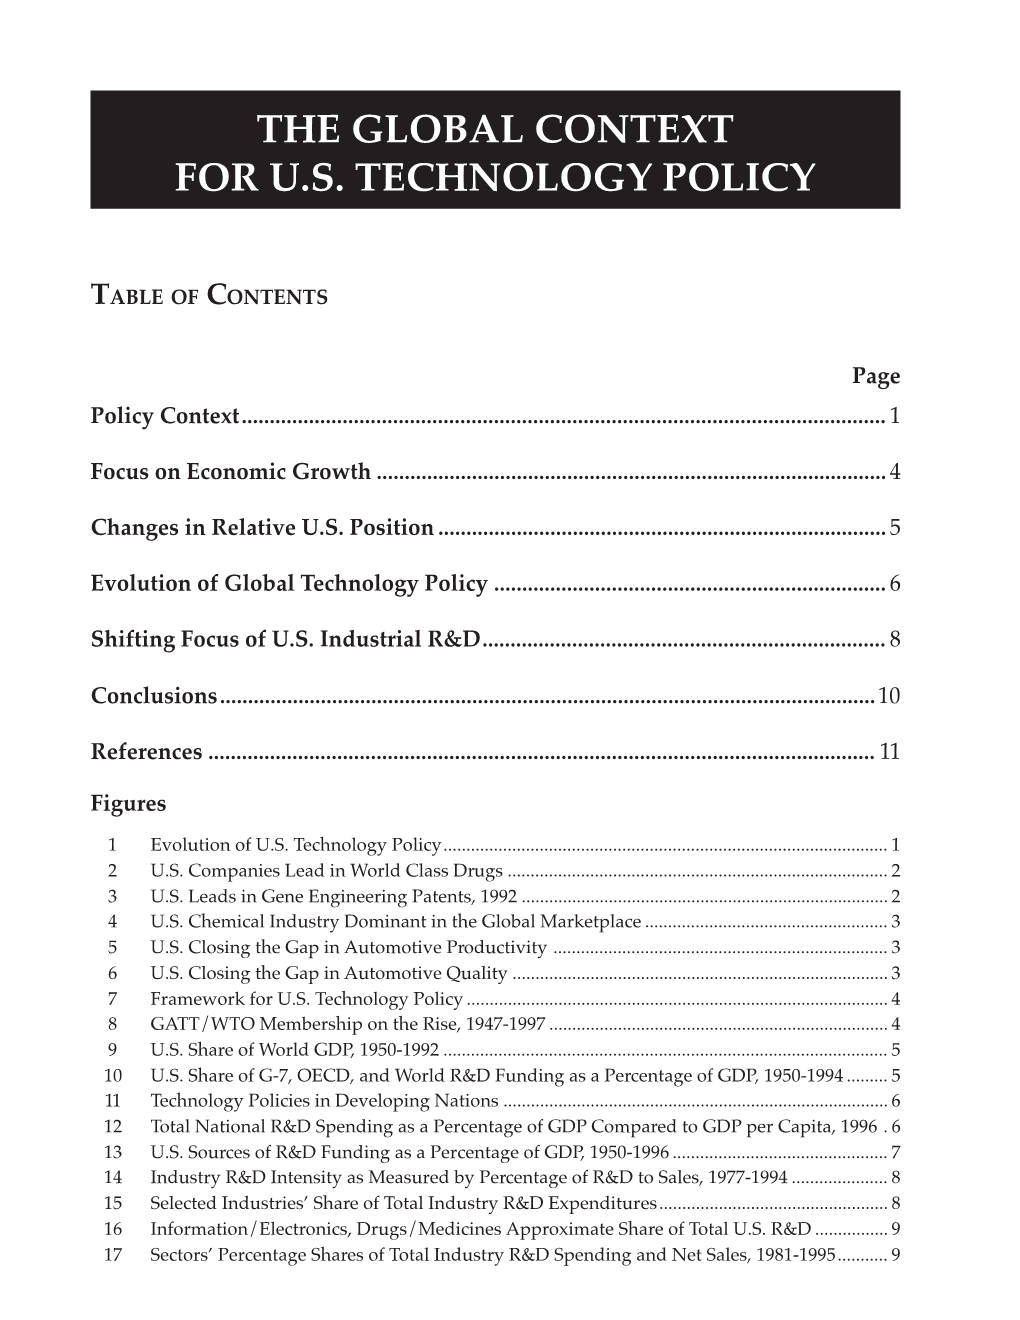 The Global Context for U.S. Technology Policy